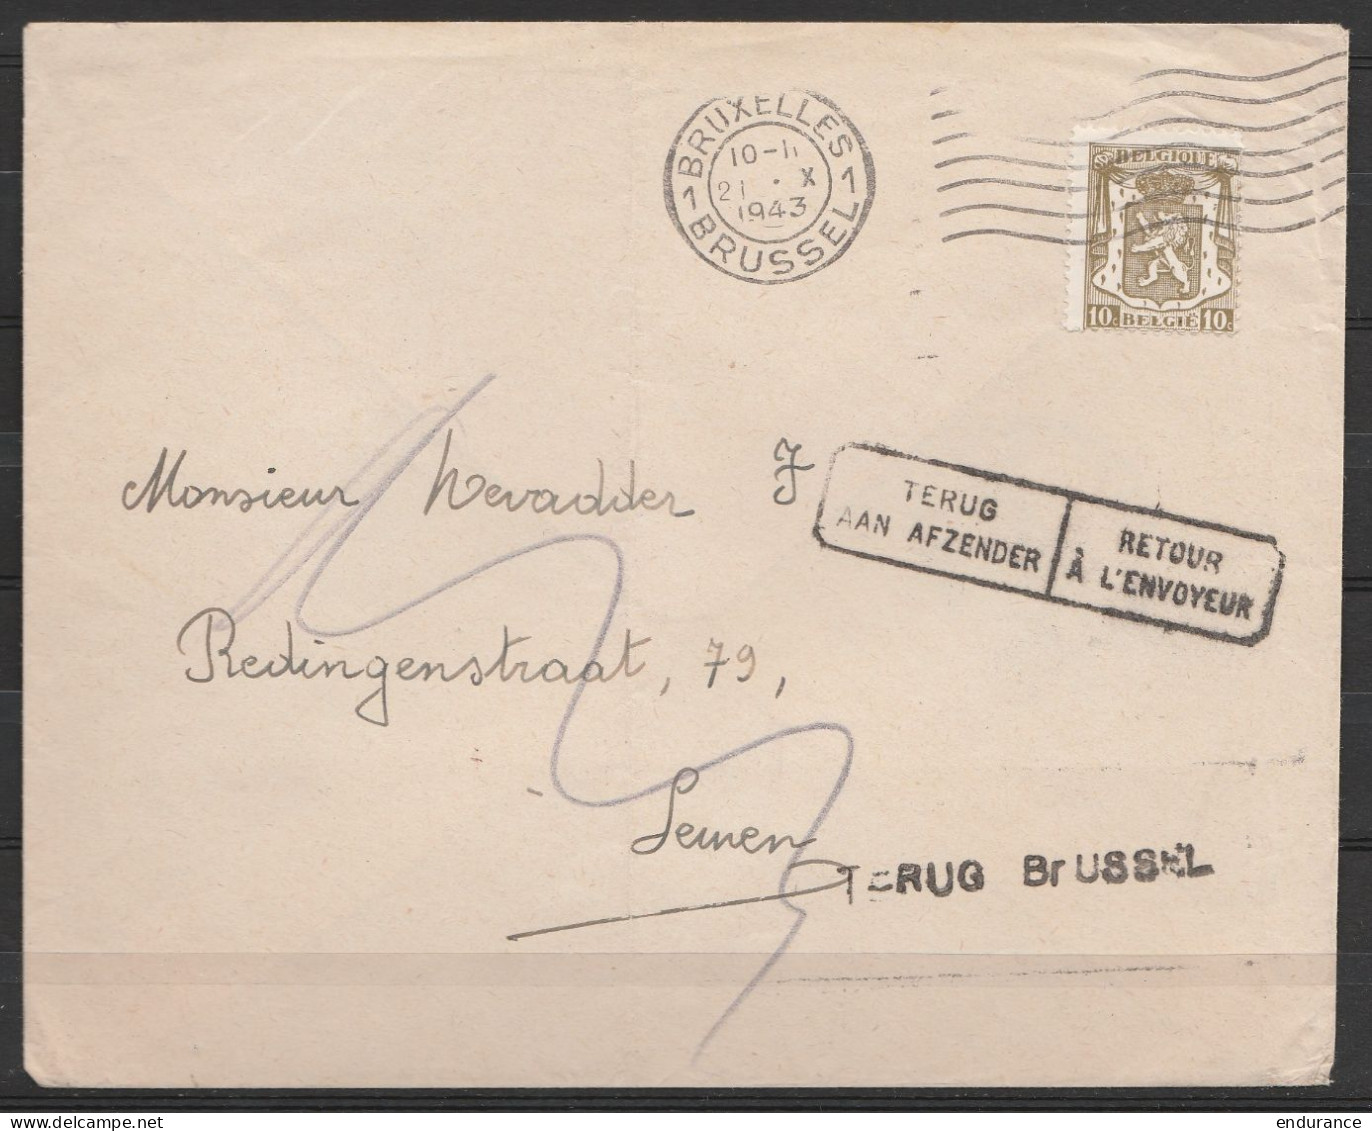 L. Affr. N°420 Flam. BRUXELLES 1/21 X 1943 Pour LEUVEN - Griffe "TERUG BRUSSEL" - [TERUG AAN AFZENDSER/RETOUR A L'ENVOYE - 1935-1949 Small Seal Of The State